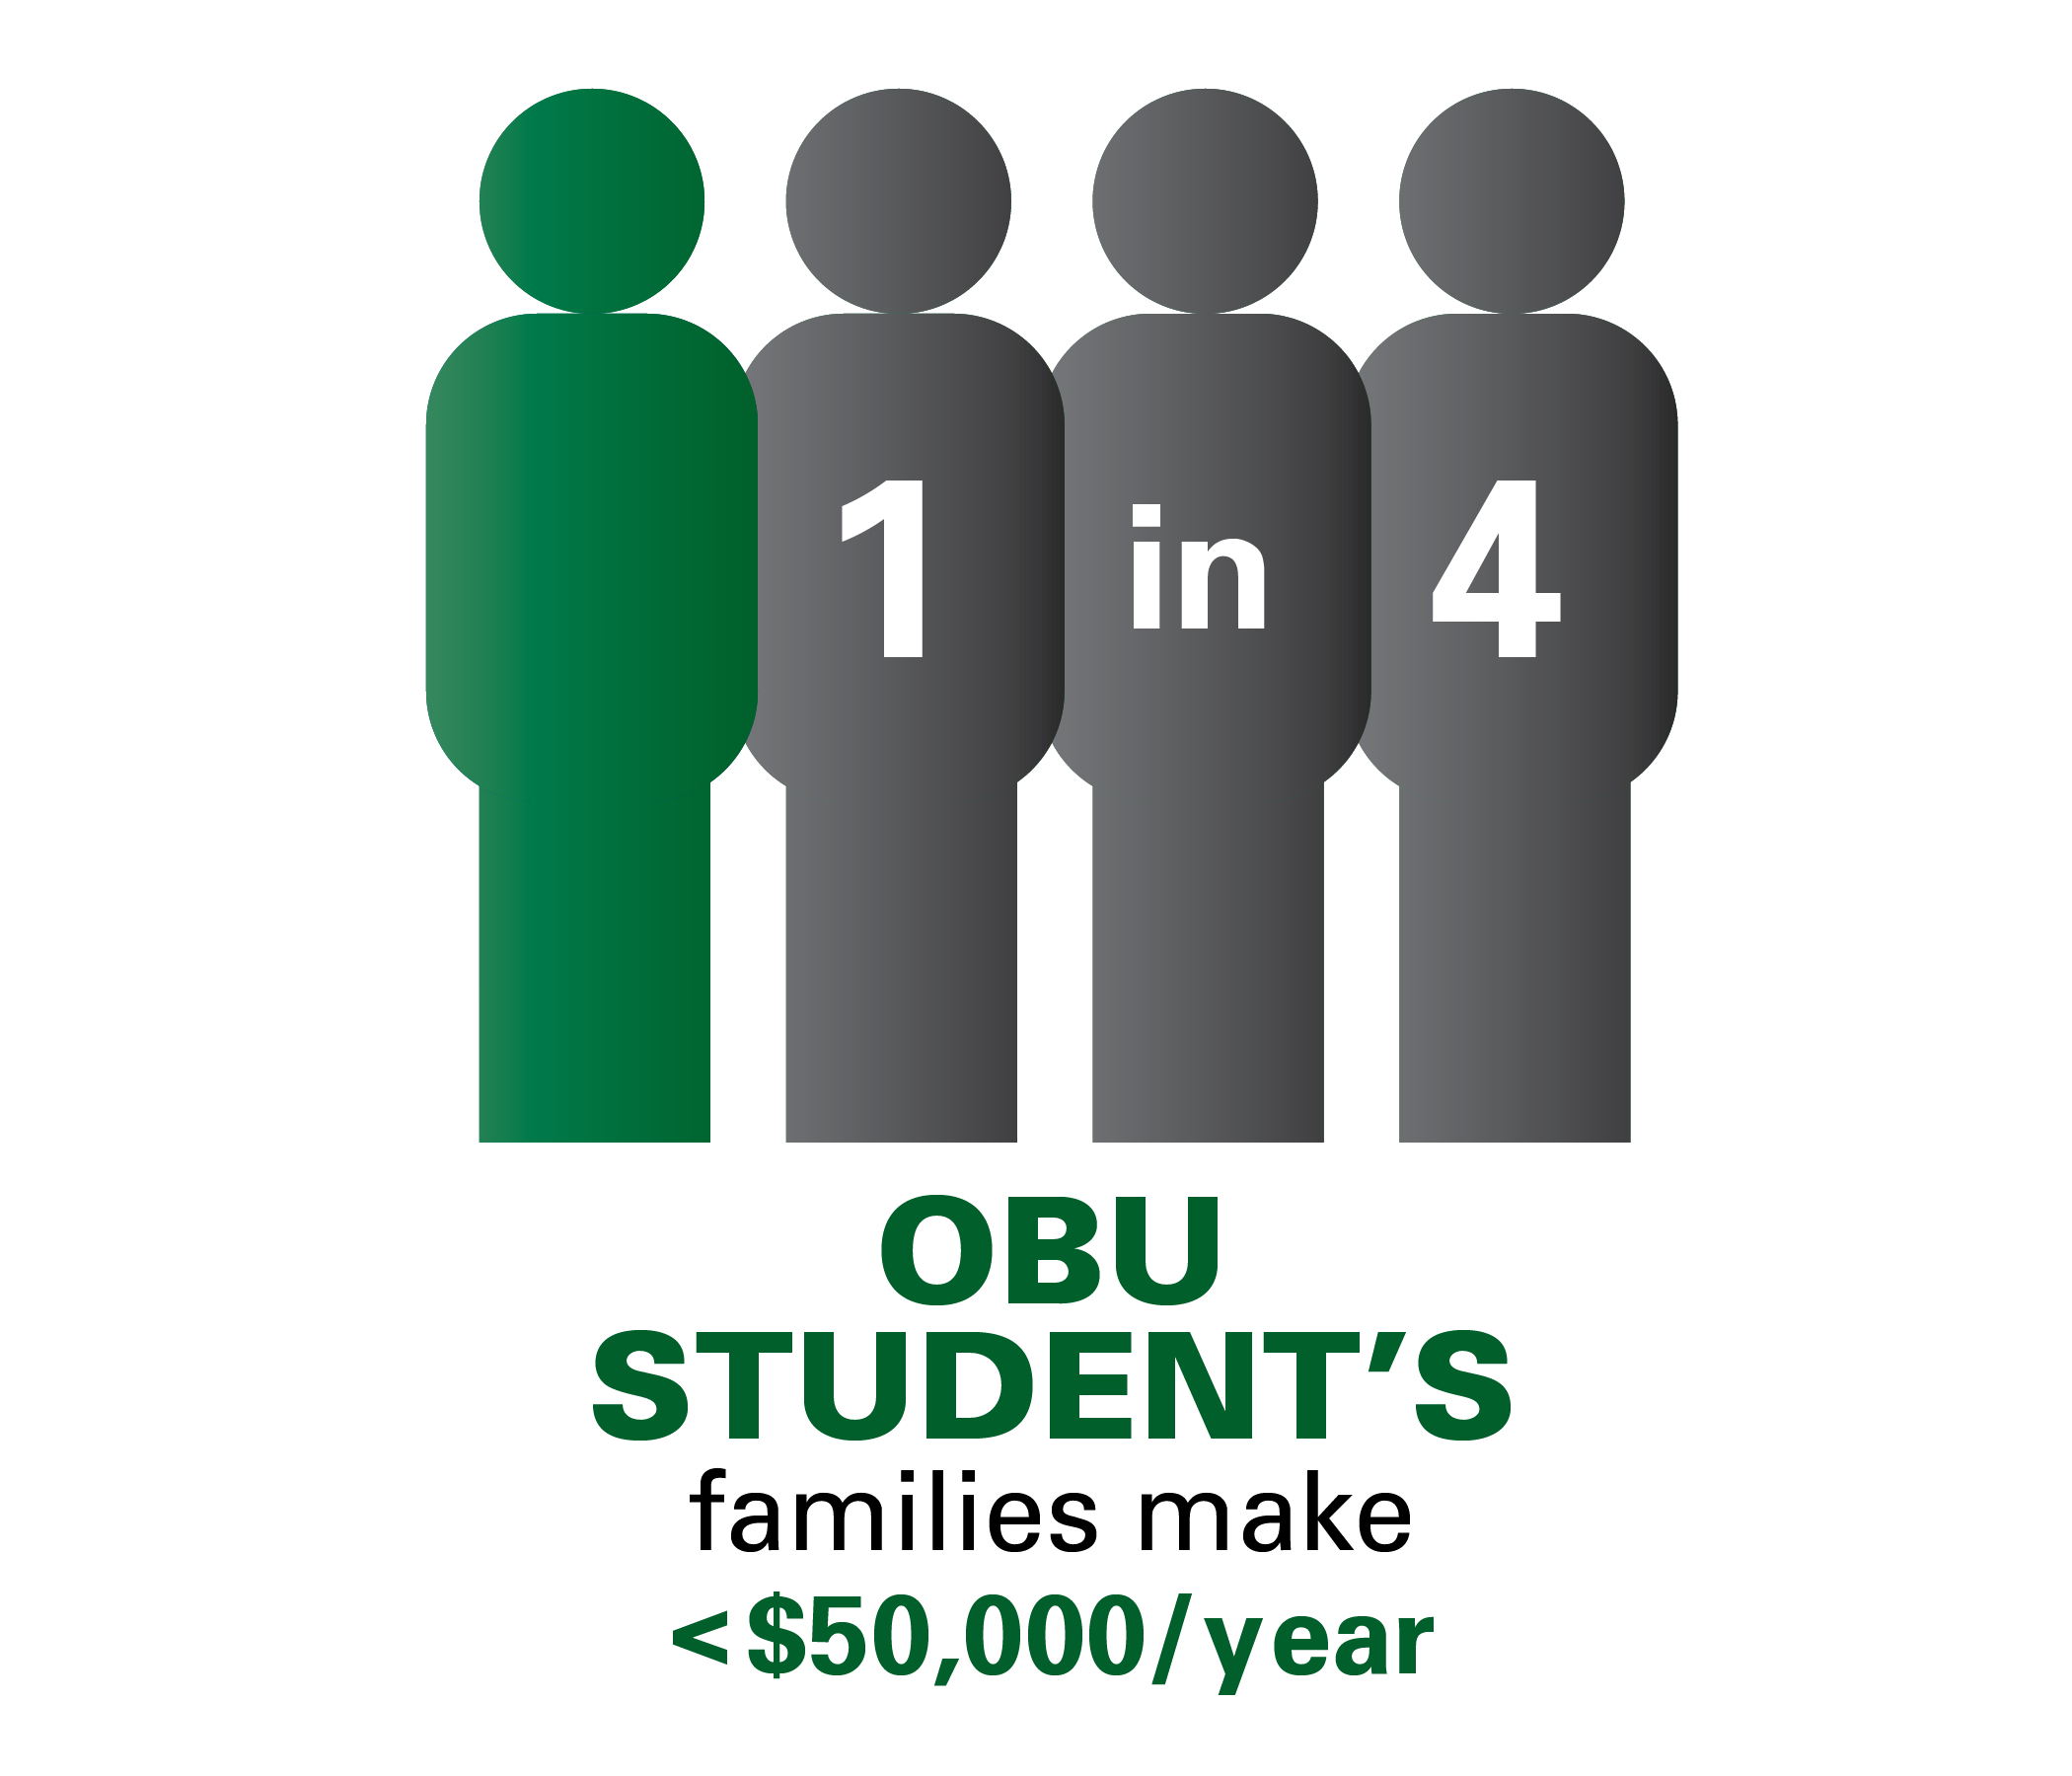 One in four OBU student's families make under $50,000 per year.